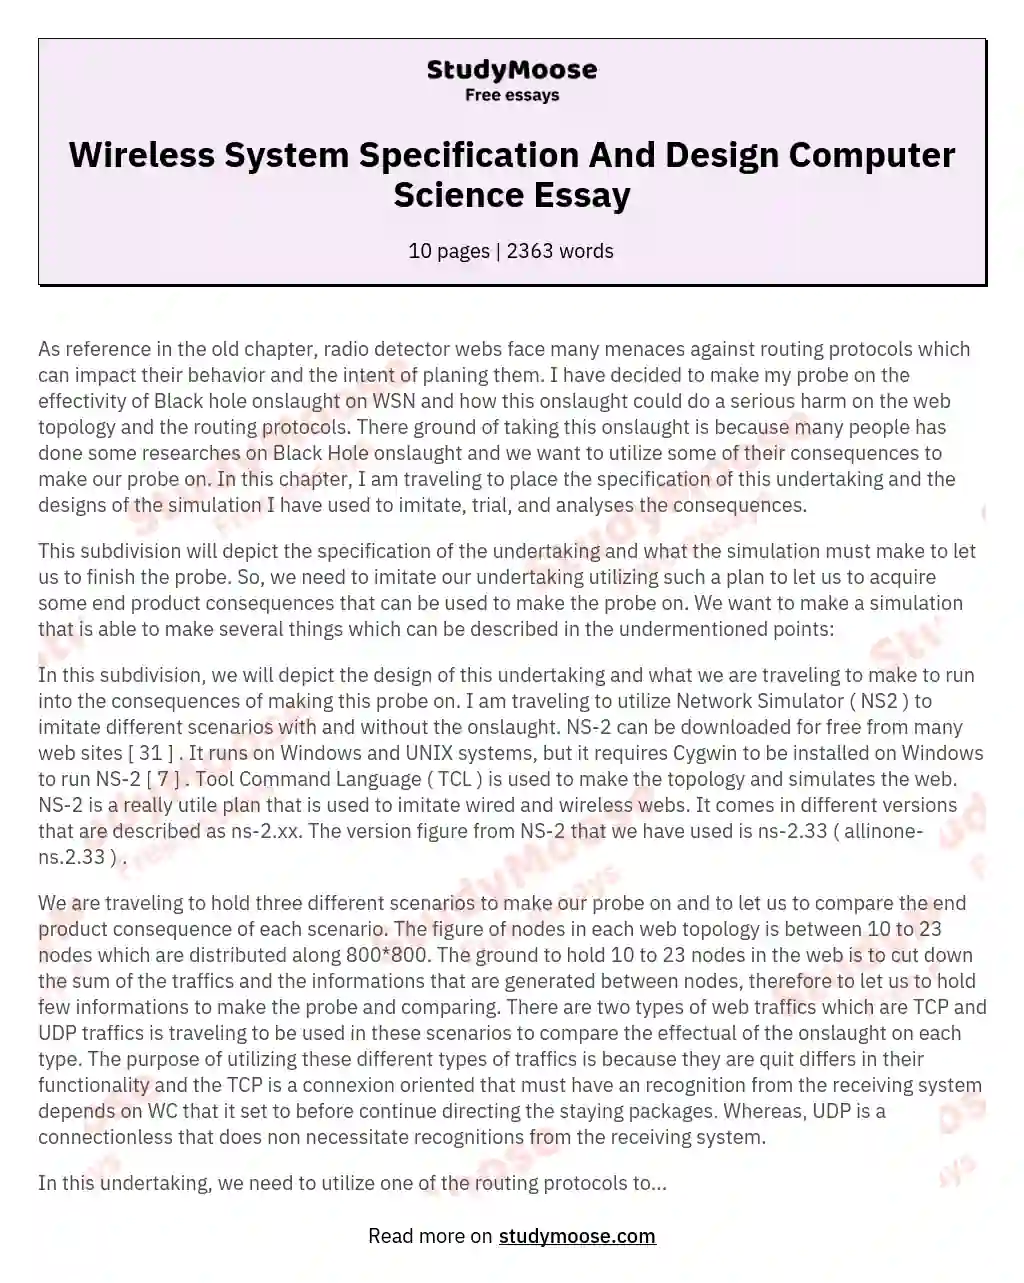 Wireless System Specification And Design Computer Science Essay